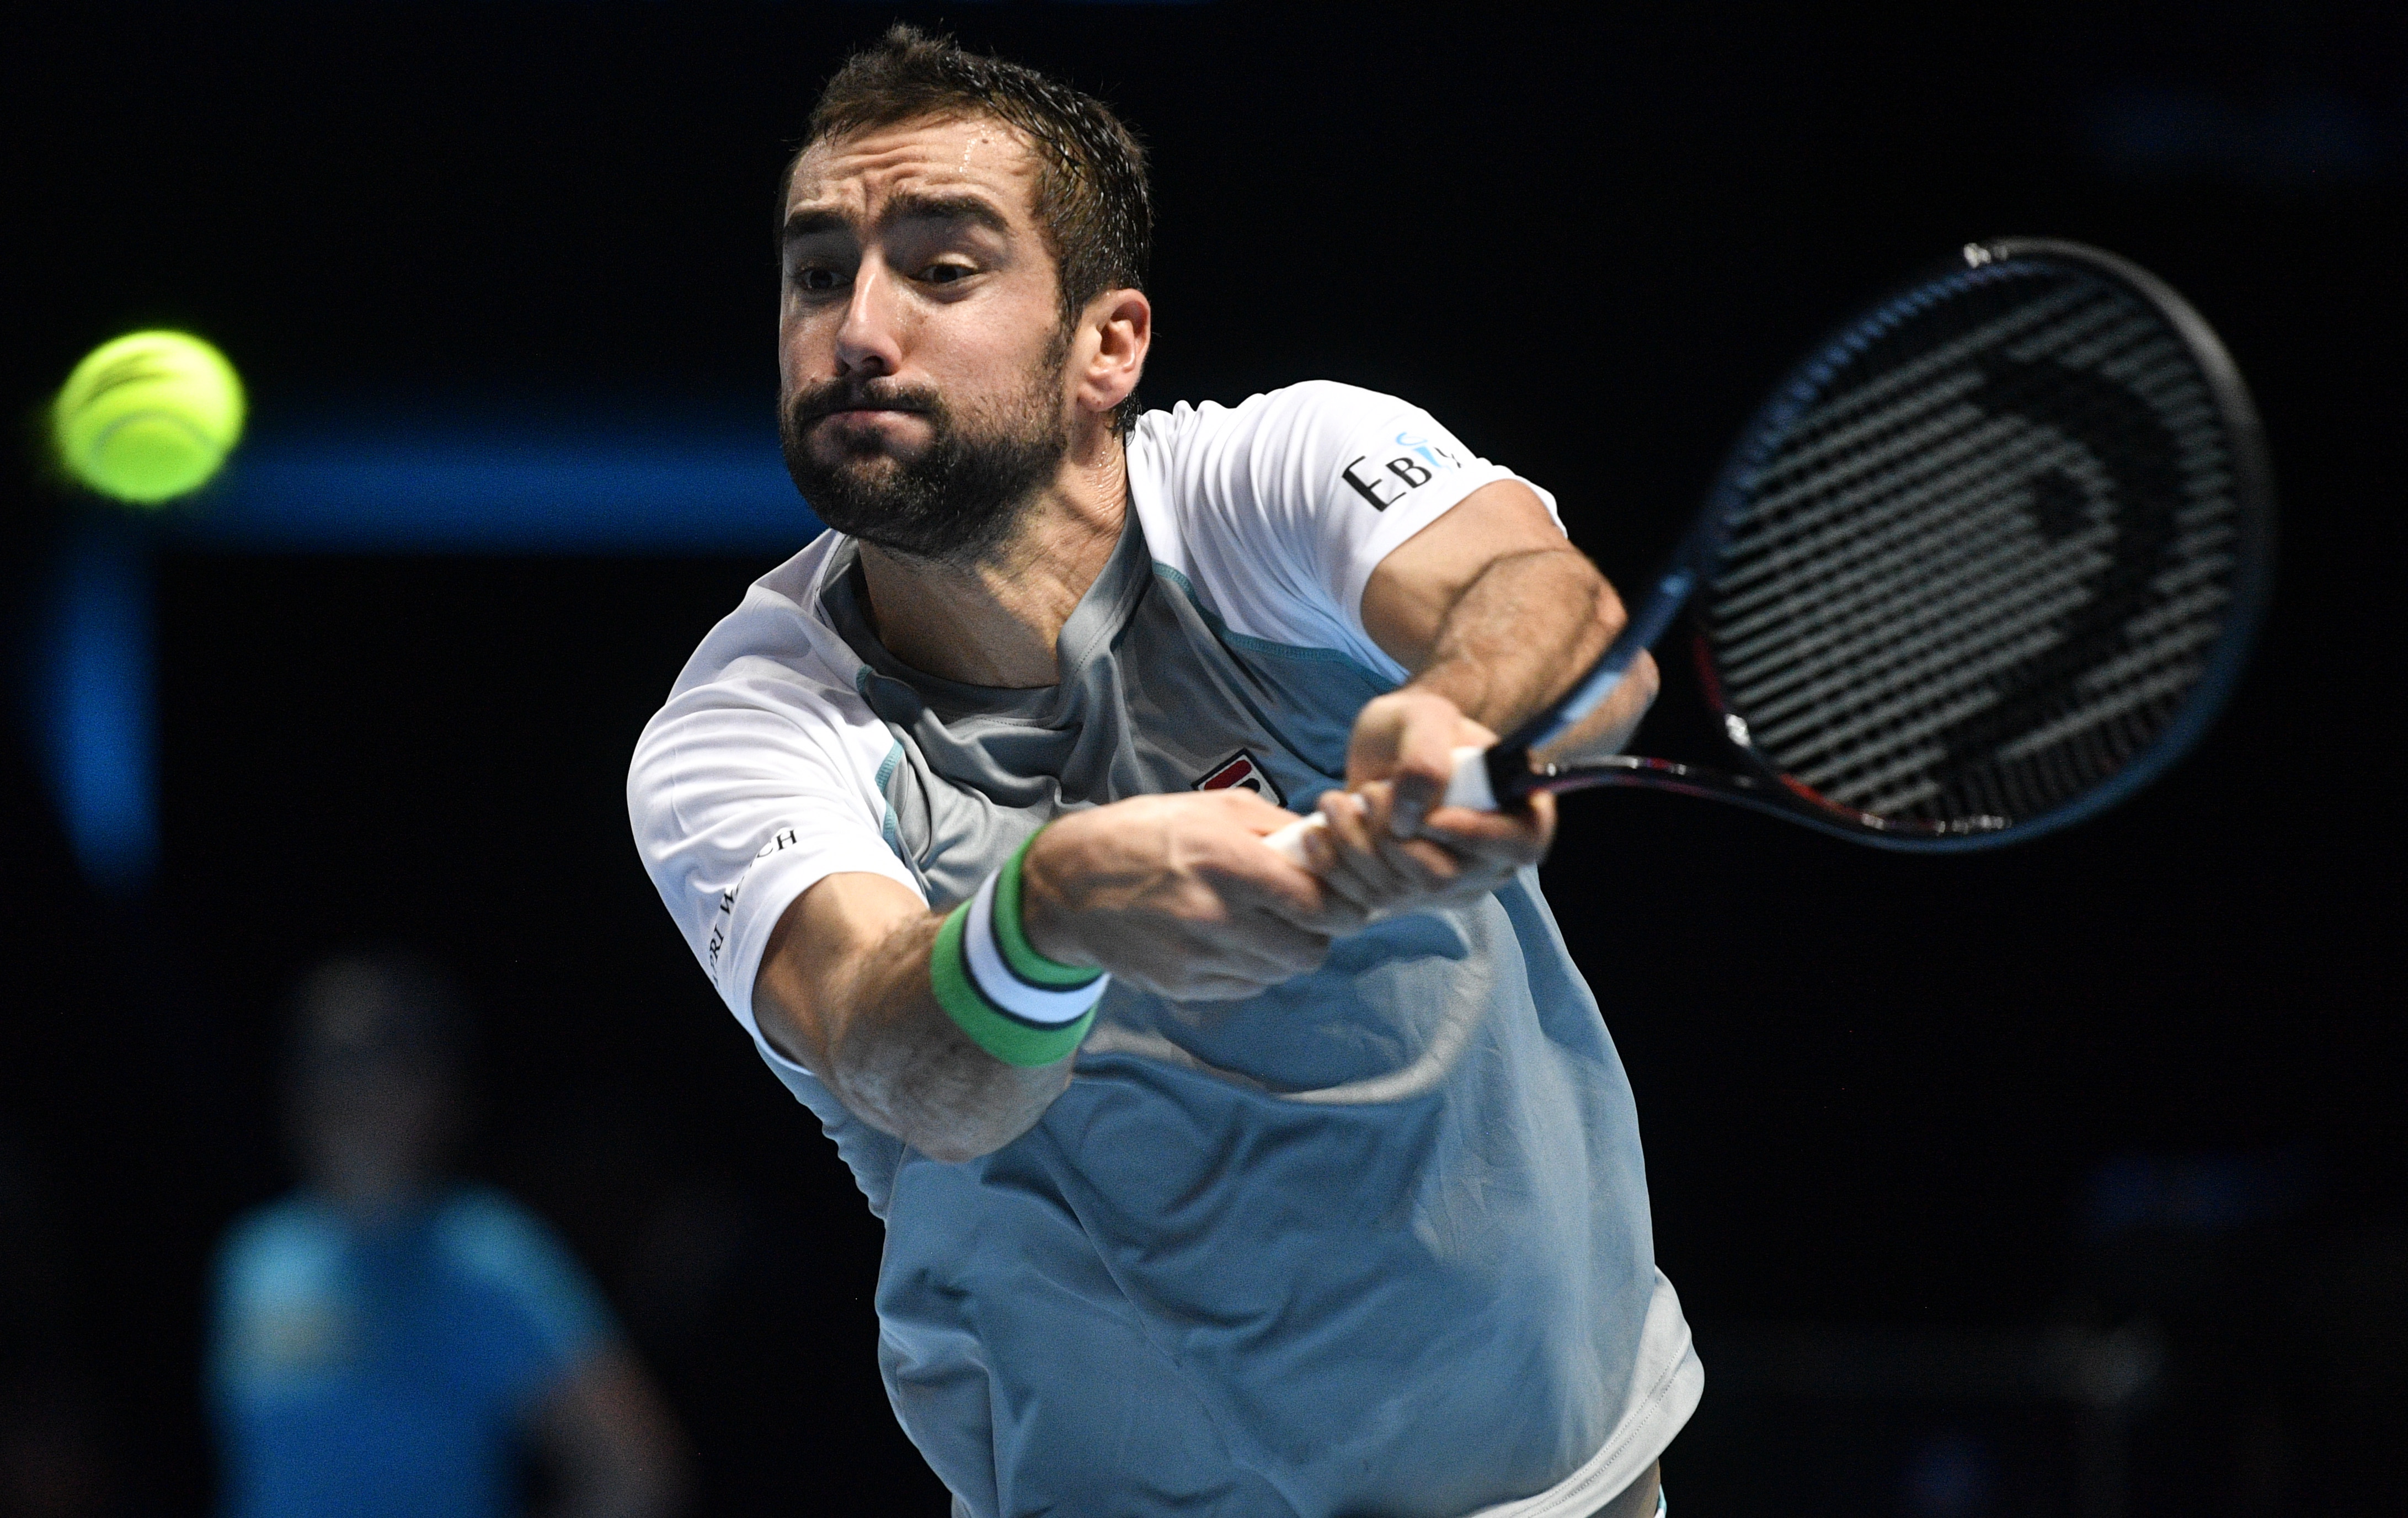 epa07165733 Croatia's Marin Cilic in action during his round-robin match with USA's John Isner on day four of the ATP World Tour Finals tennis tournament at the O2 Arena in London, Britain, 14 November 2018.  EPA/NEIL HALL